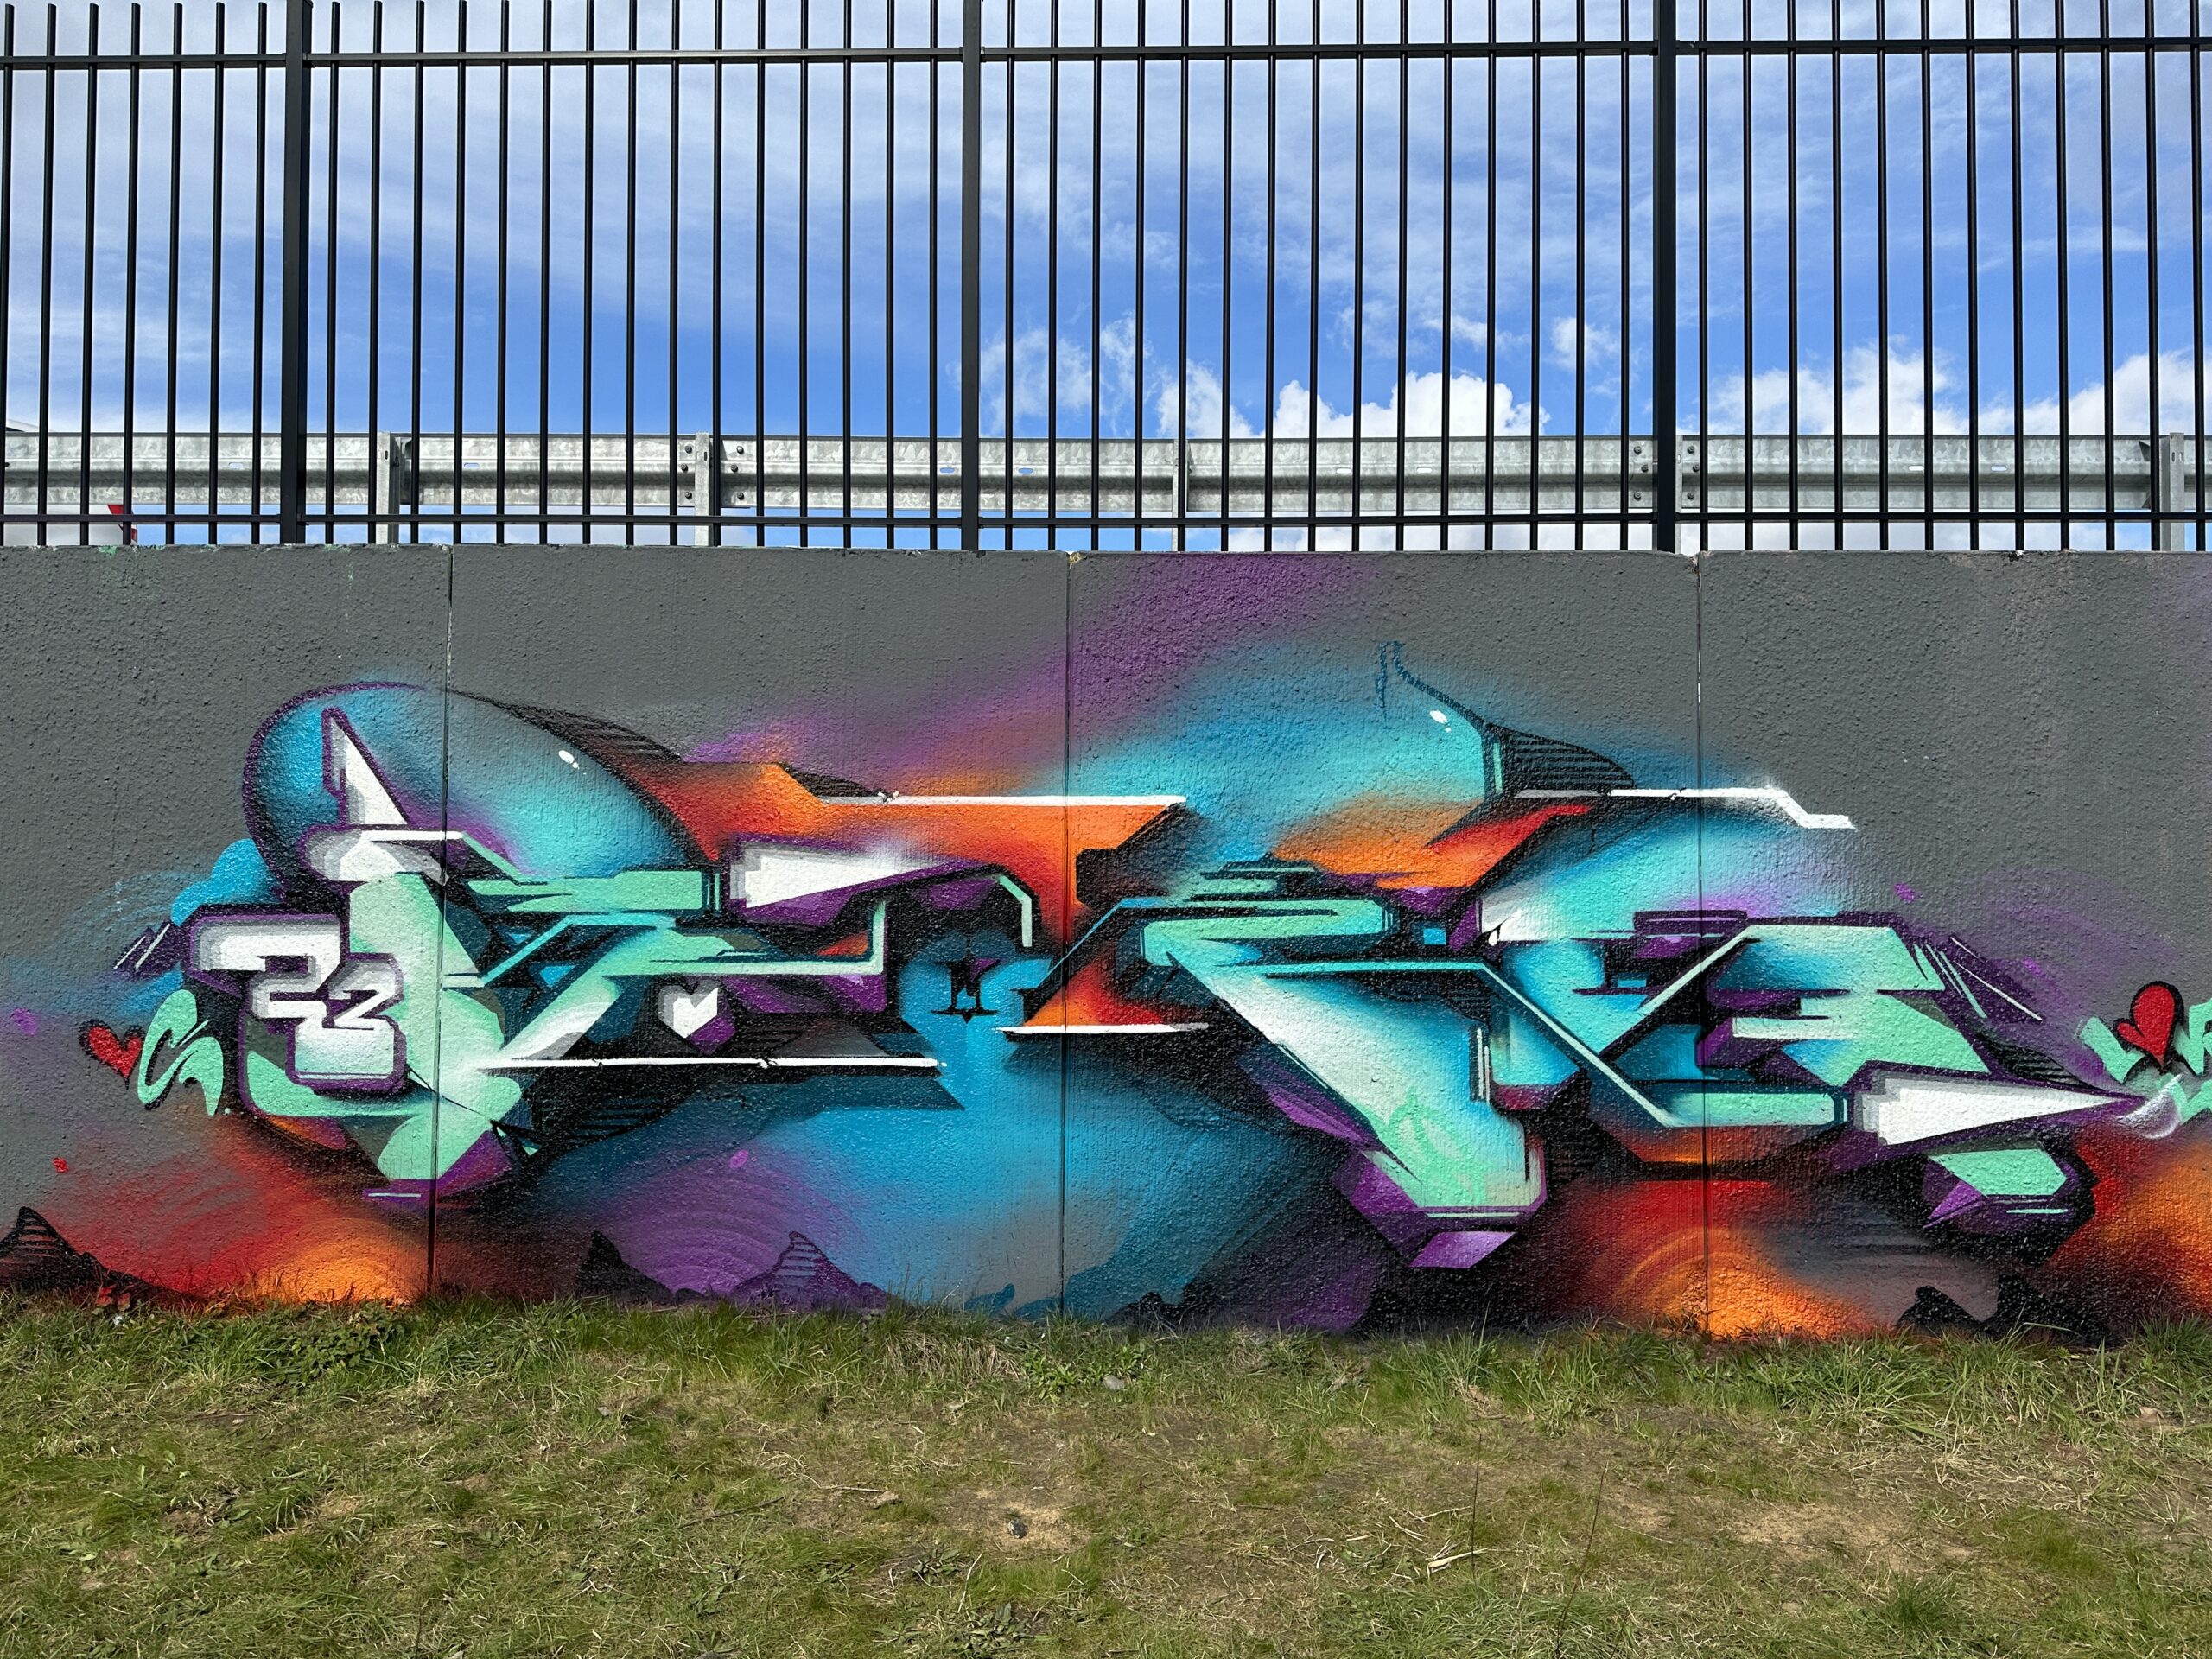 A work by Does - Geleen, the Netherlands 2023